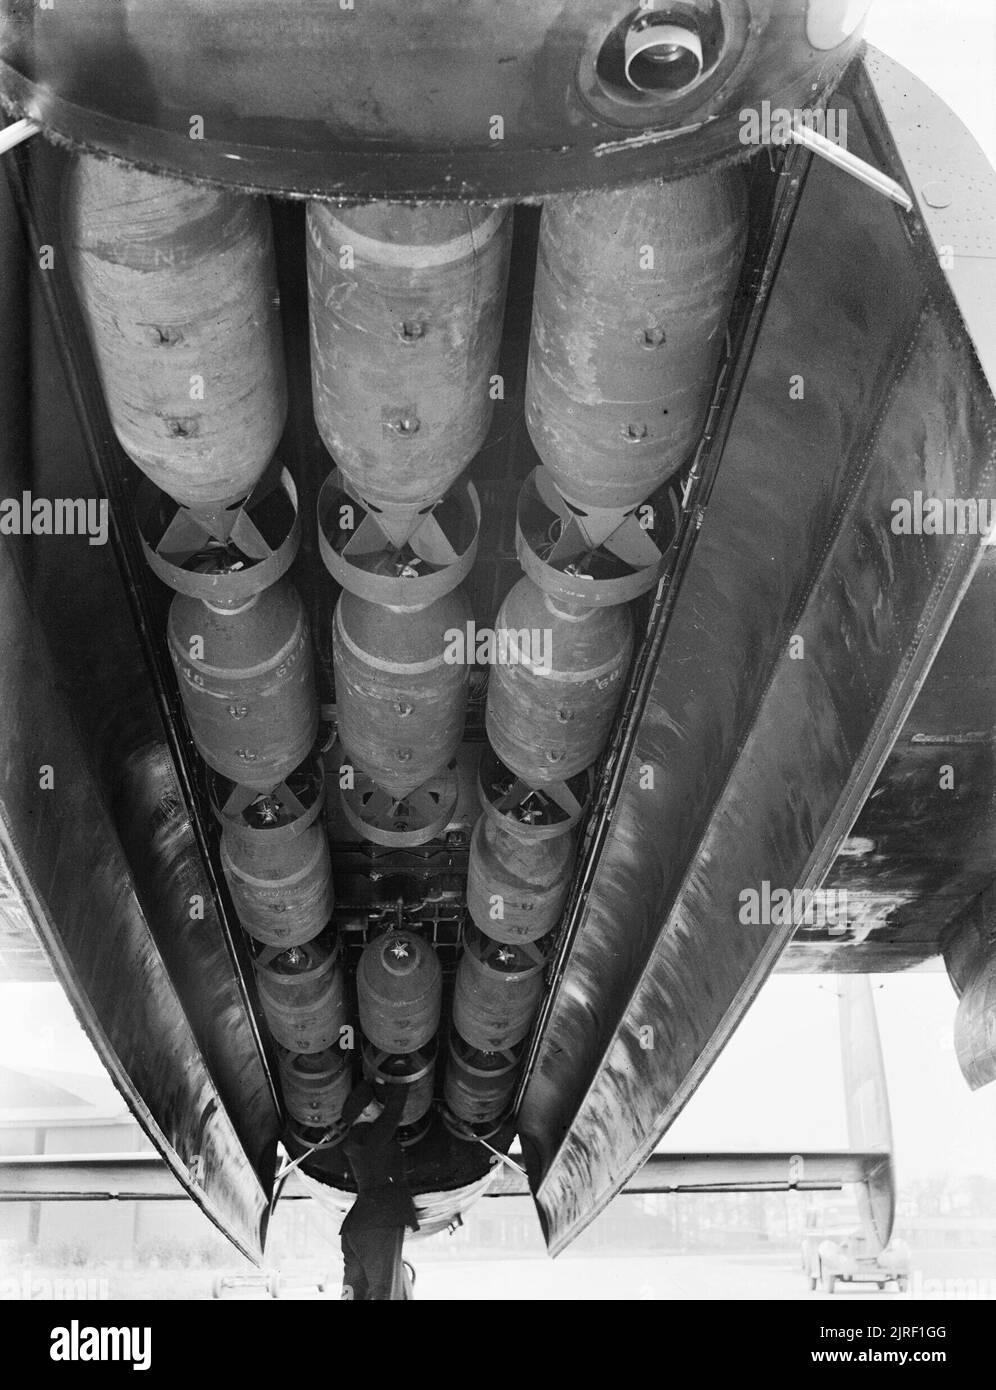 The bomb bay of an Avro Lancaster of No. 9 Squadron RAF at Bardney, Lincolnshire, loaded with 1,000lb bombs before a night raid on Stettin, 5 January 1944. The bomb load used for industrial demolition (Bomber Command executive codeword 'Abnormal'), loaded in the bomb-bay of an Avro Lancaster of No. 9 Squadron RAF at Bardney, Lincolnshire, before a night raid on Stettin, Germany. 'Abnormal' consisted of 14 x 1,000-lb MC high-explosive bombs. Stock Photo